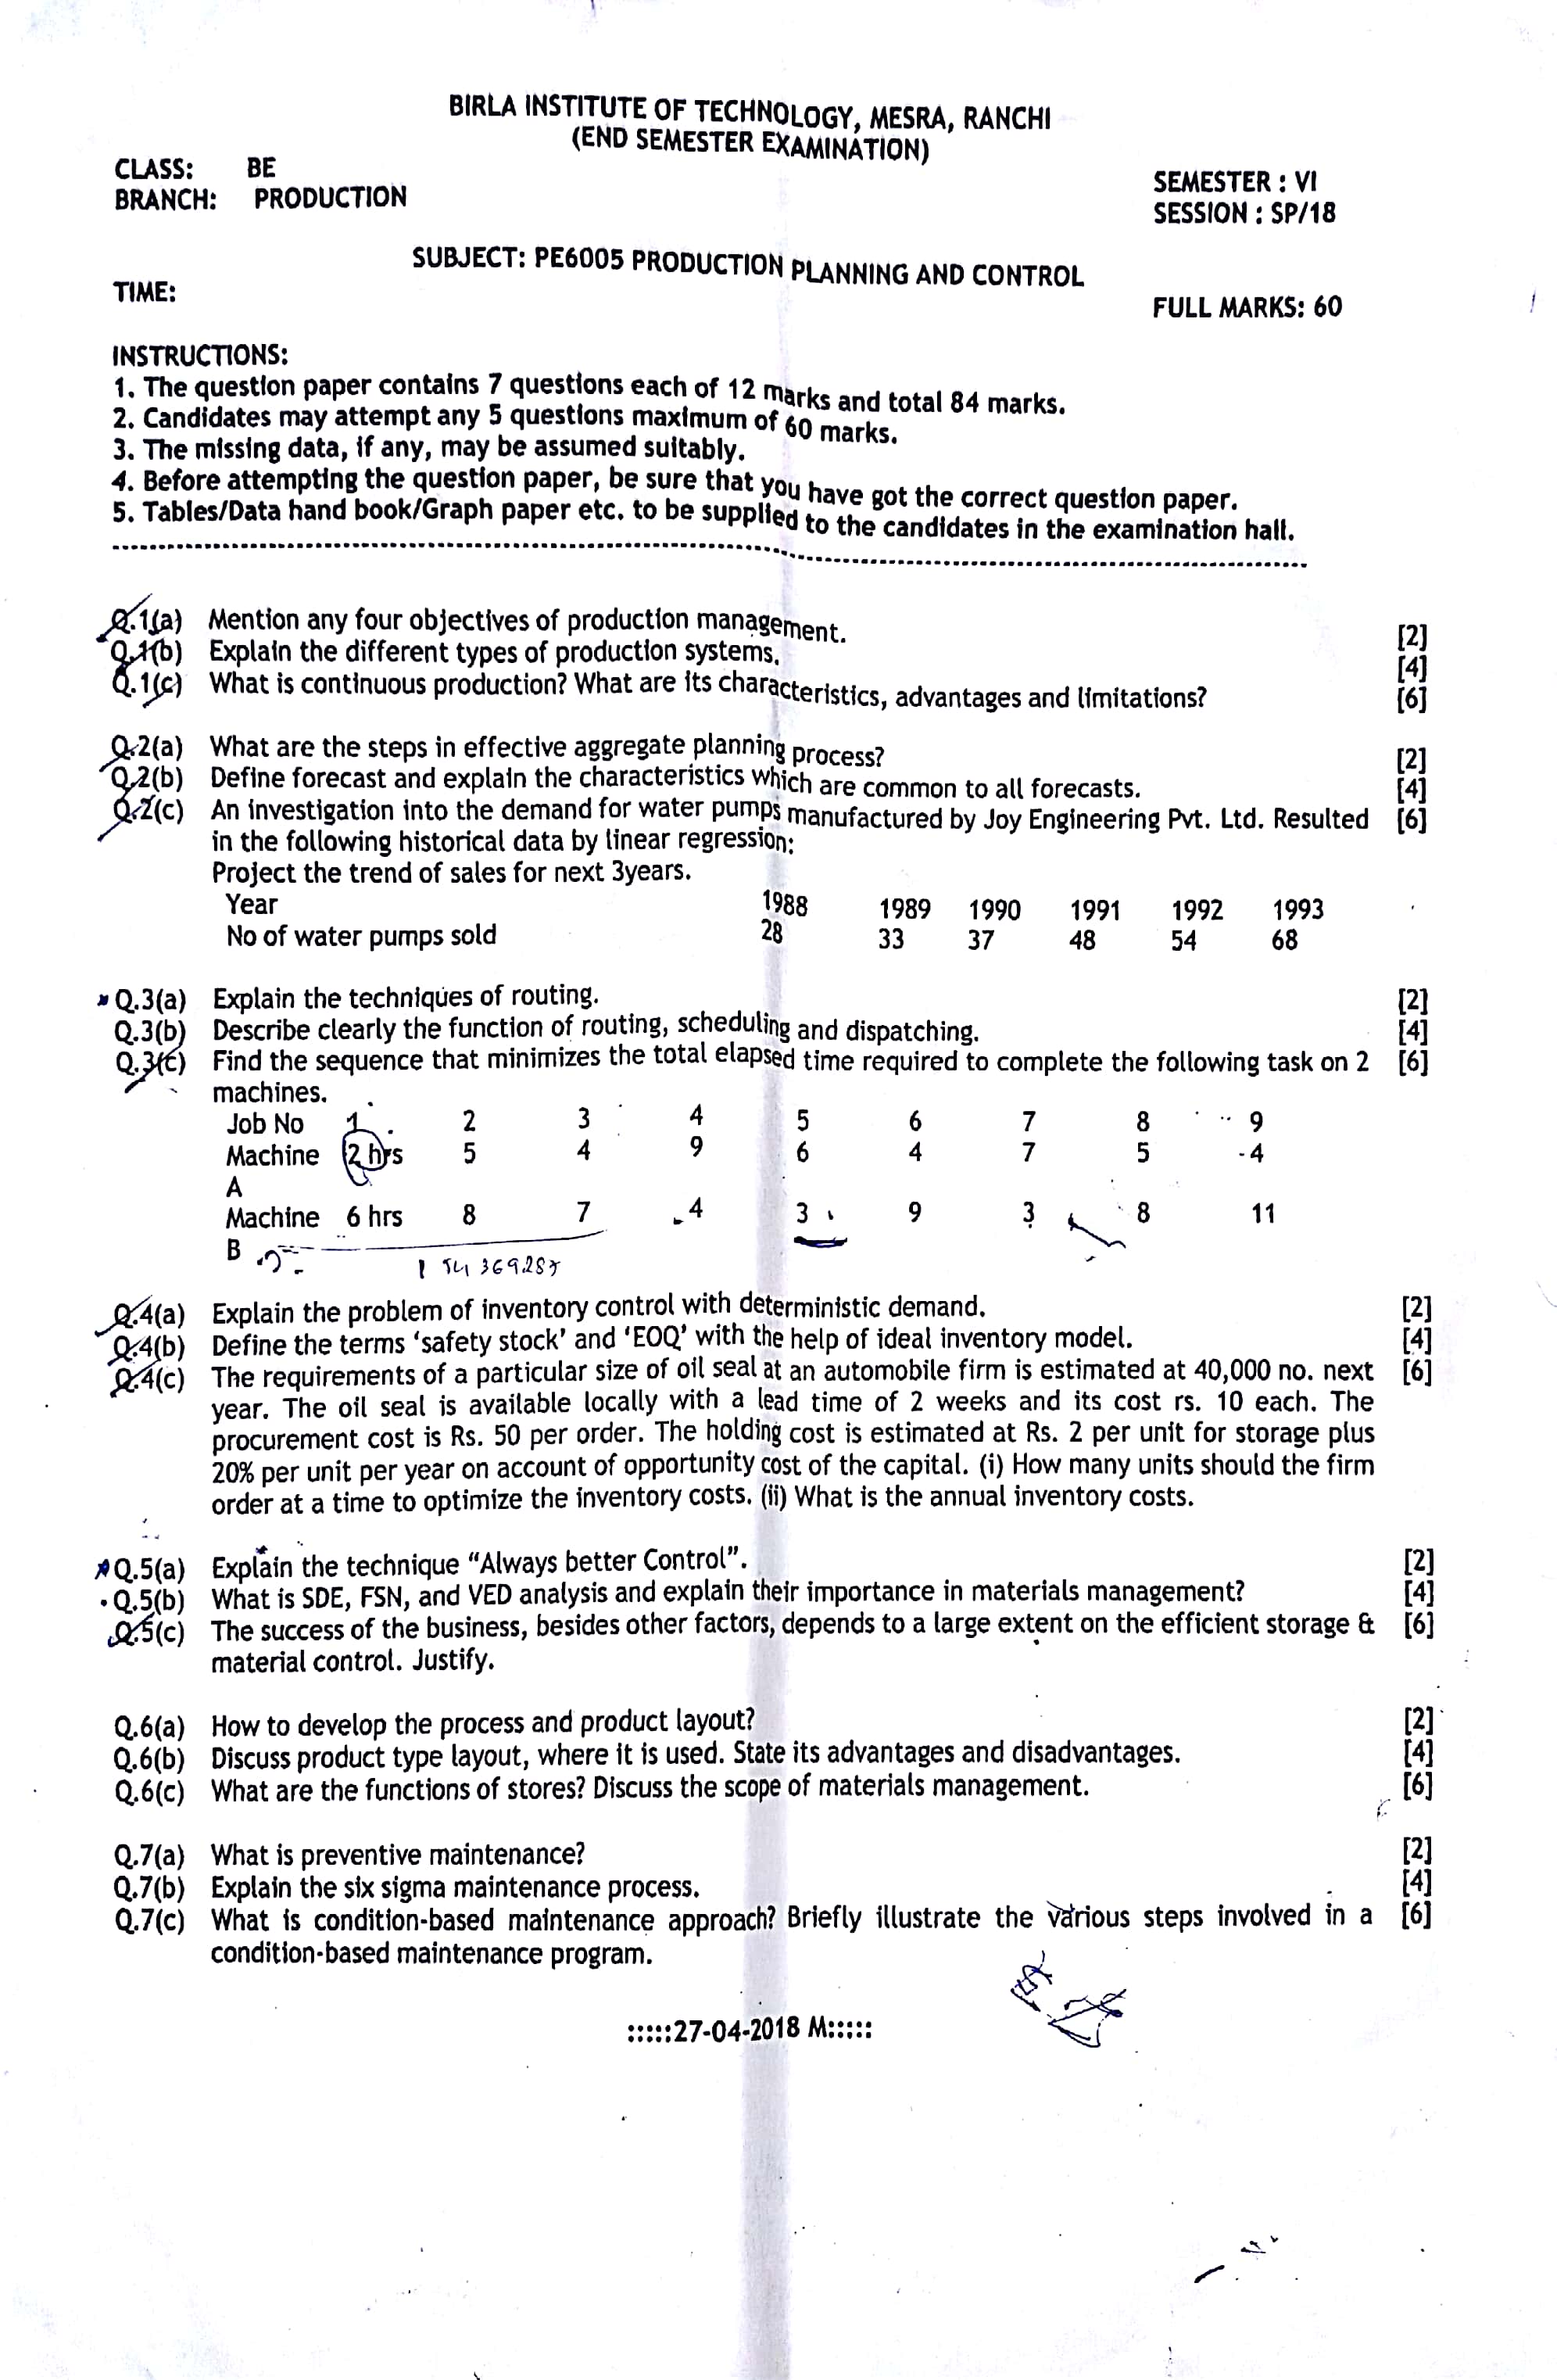 Production Planning and Control Question Paper-2489_jWBzLe.jpg